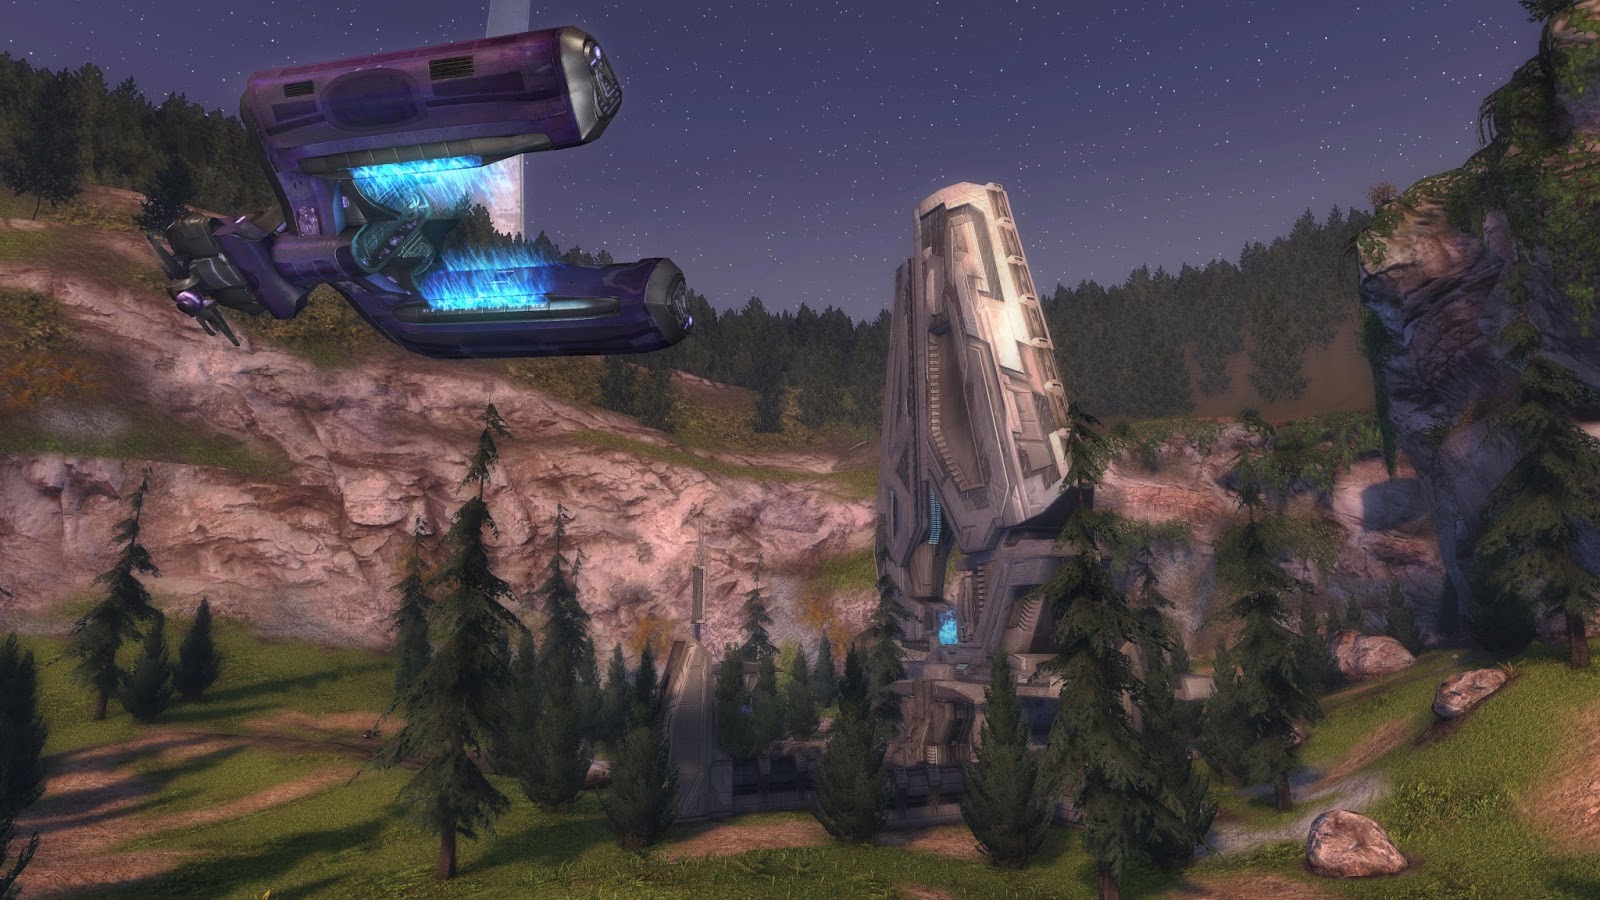 Halo: Combat Evolved' was originally going to be an open-world game